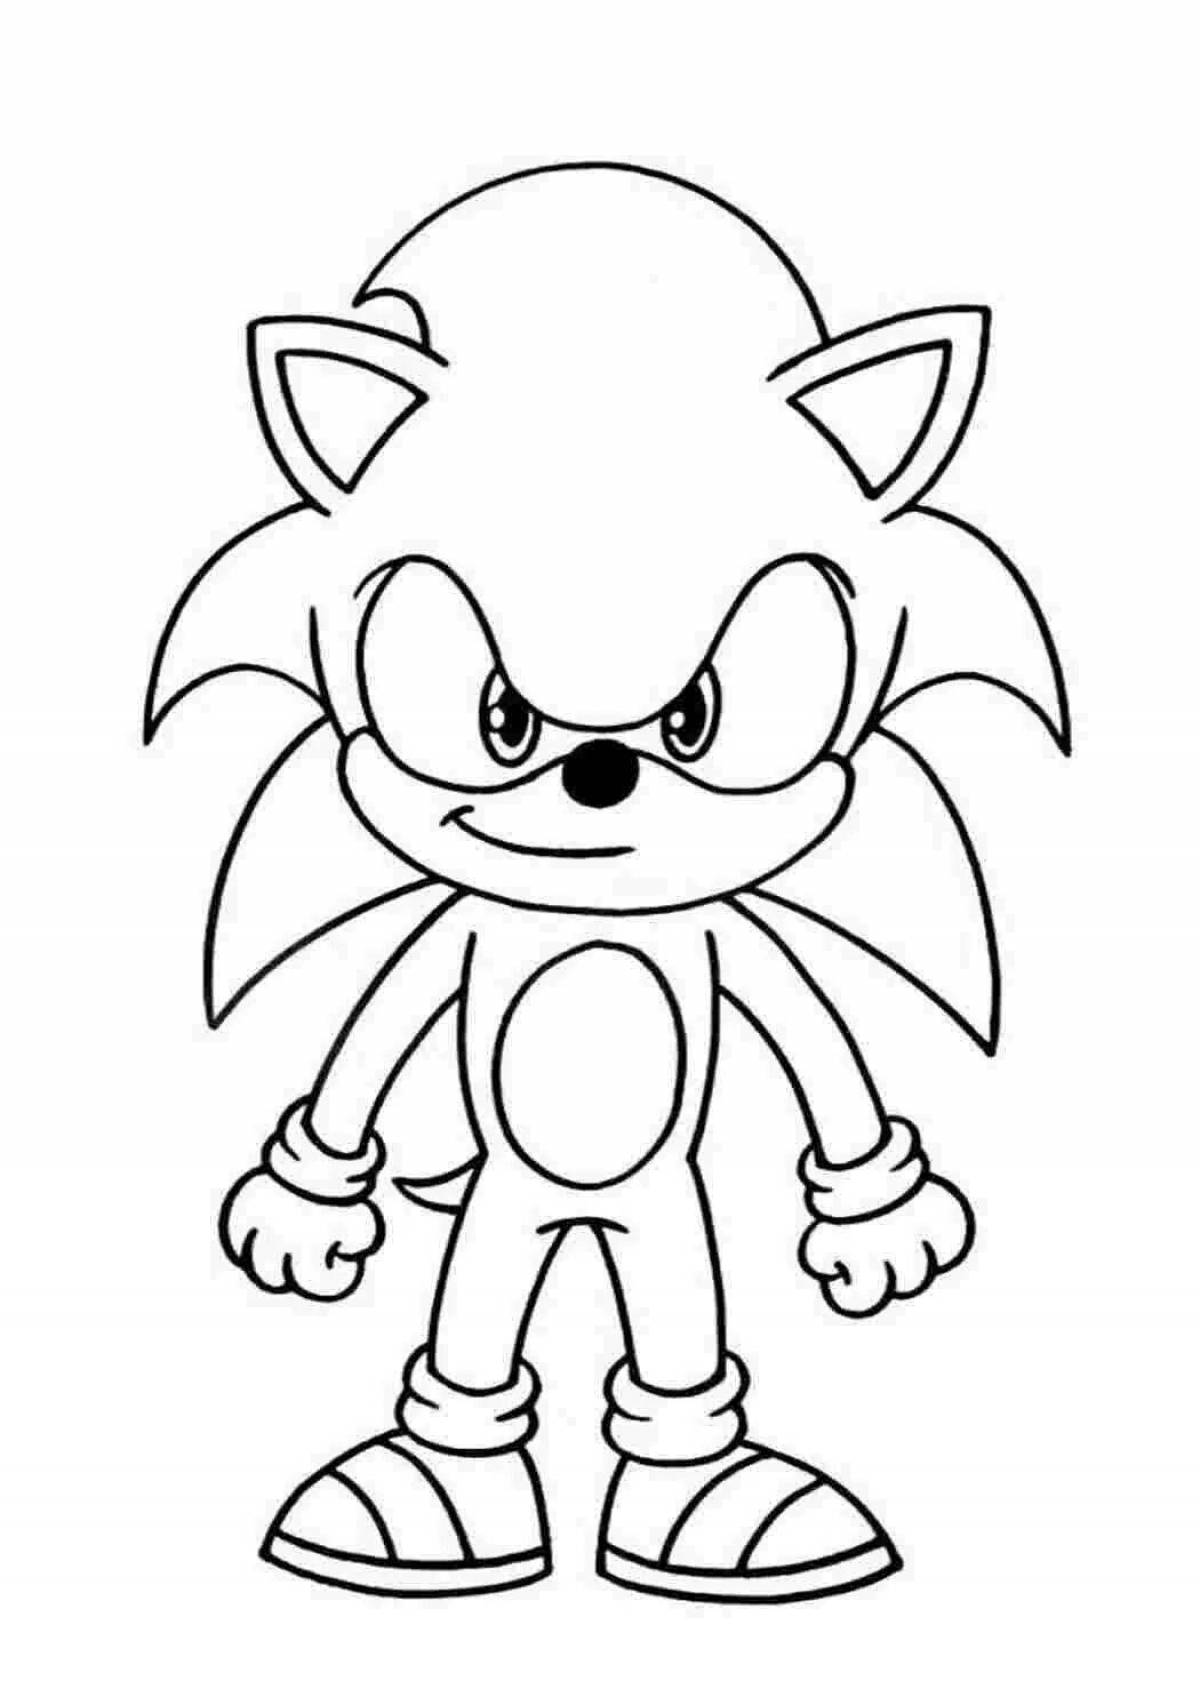 Inspirational sonic exe coloring book for kids